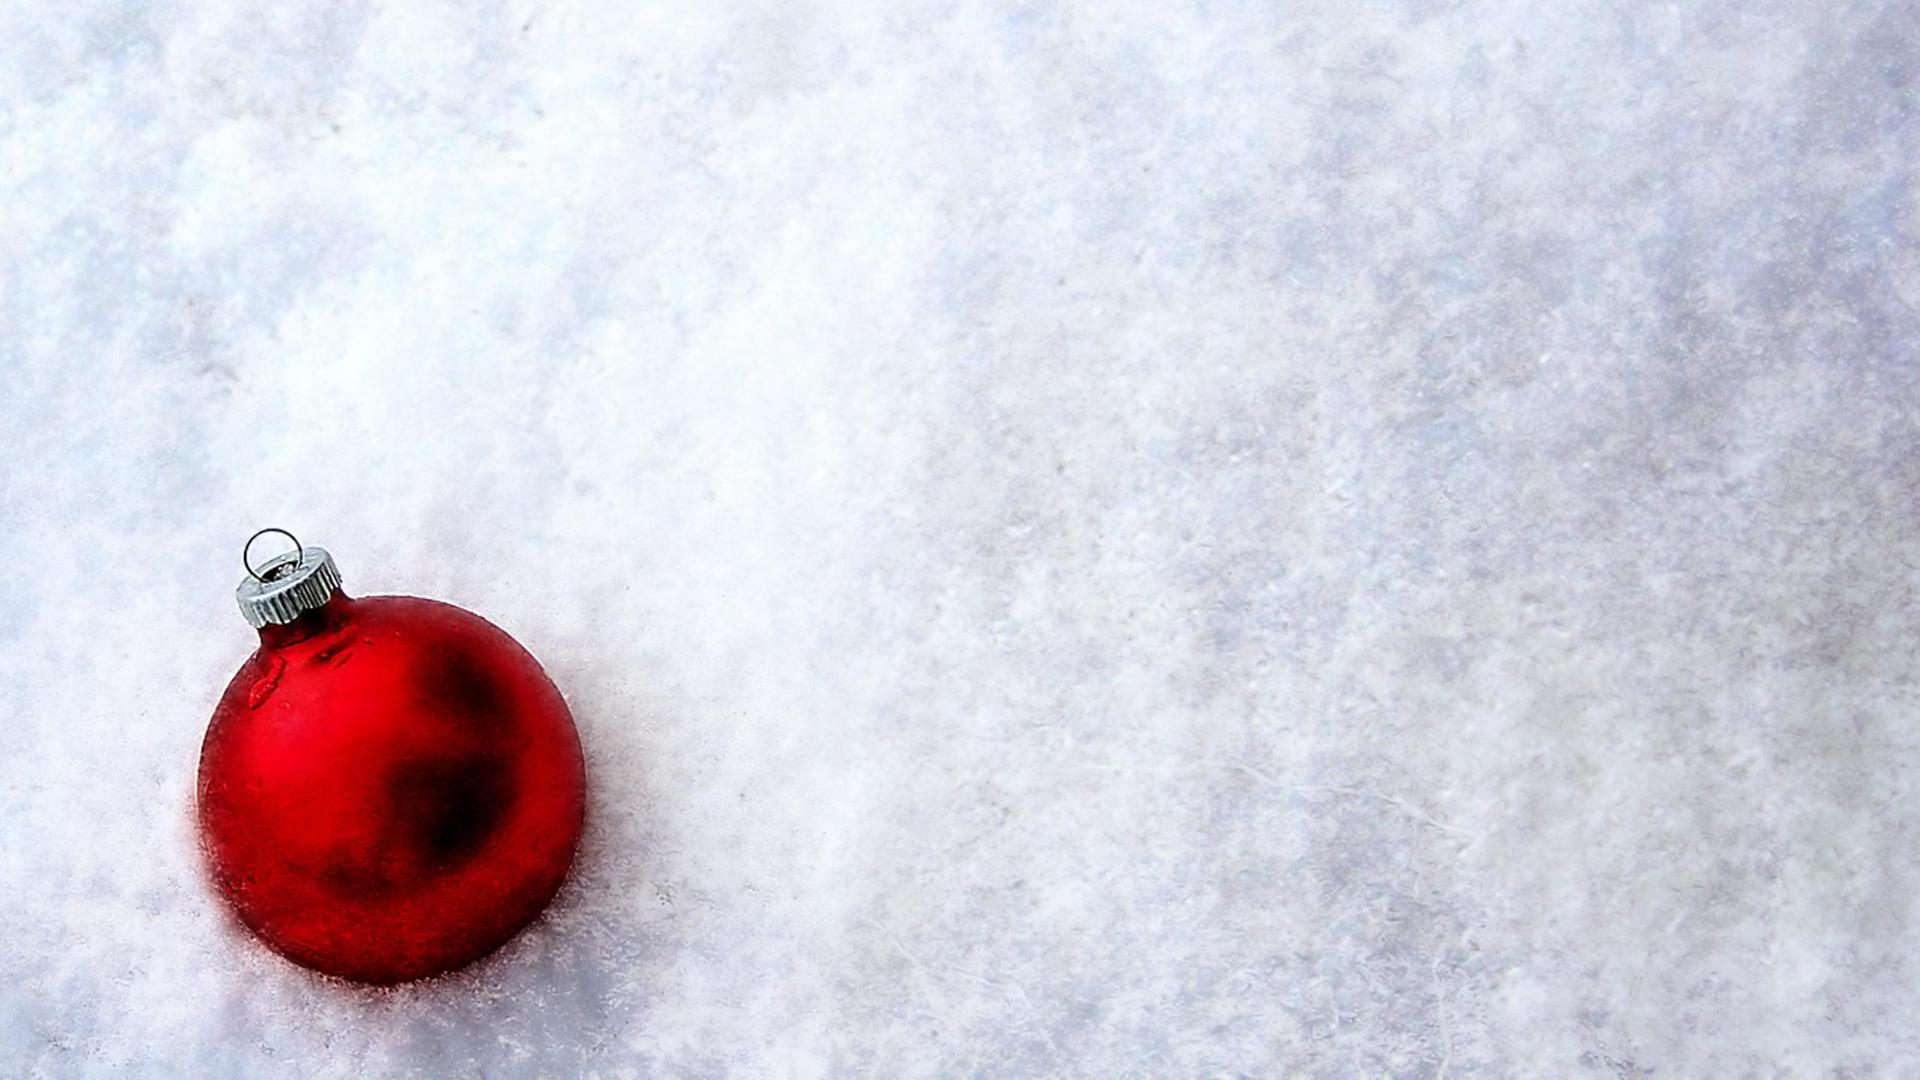 Shiny red Christmas ball in the white and cold snow